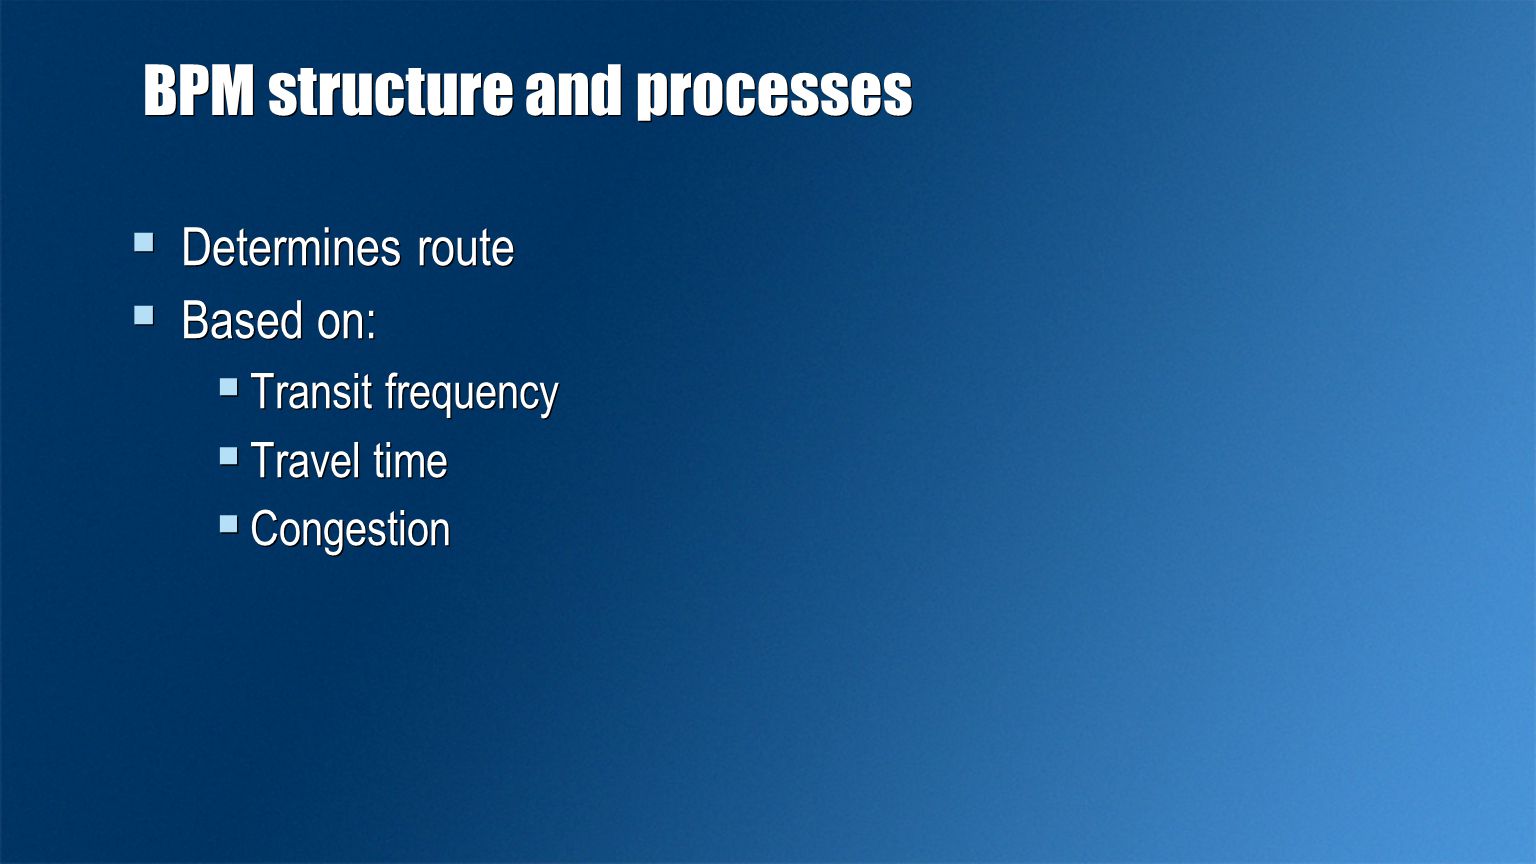 BPM structure and processes  Determines route  Based on:  Transit frequency  Travel time  Congestion  Determines route  Based on:  Transit frequency  Travel time  Congestion